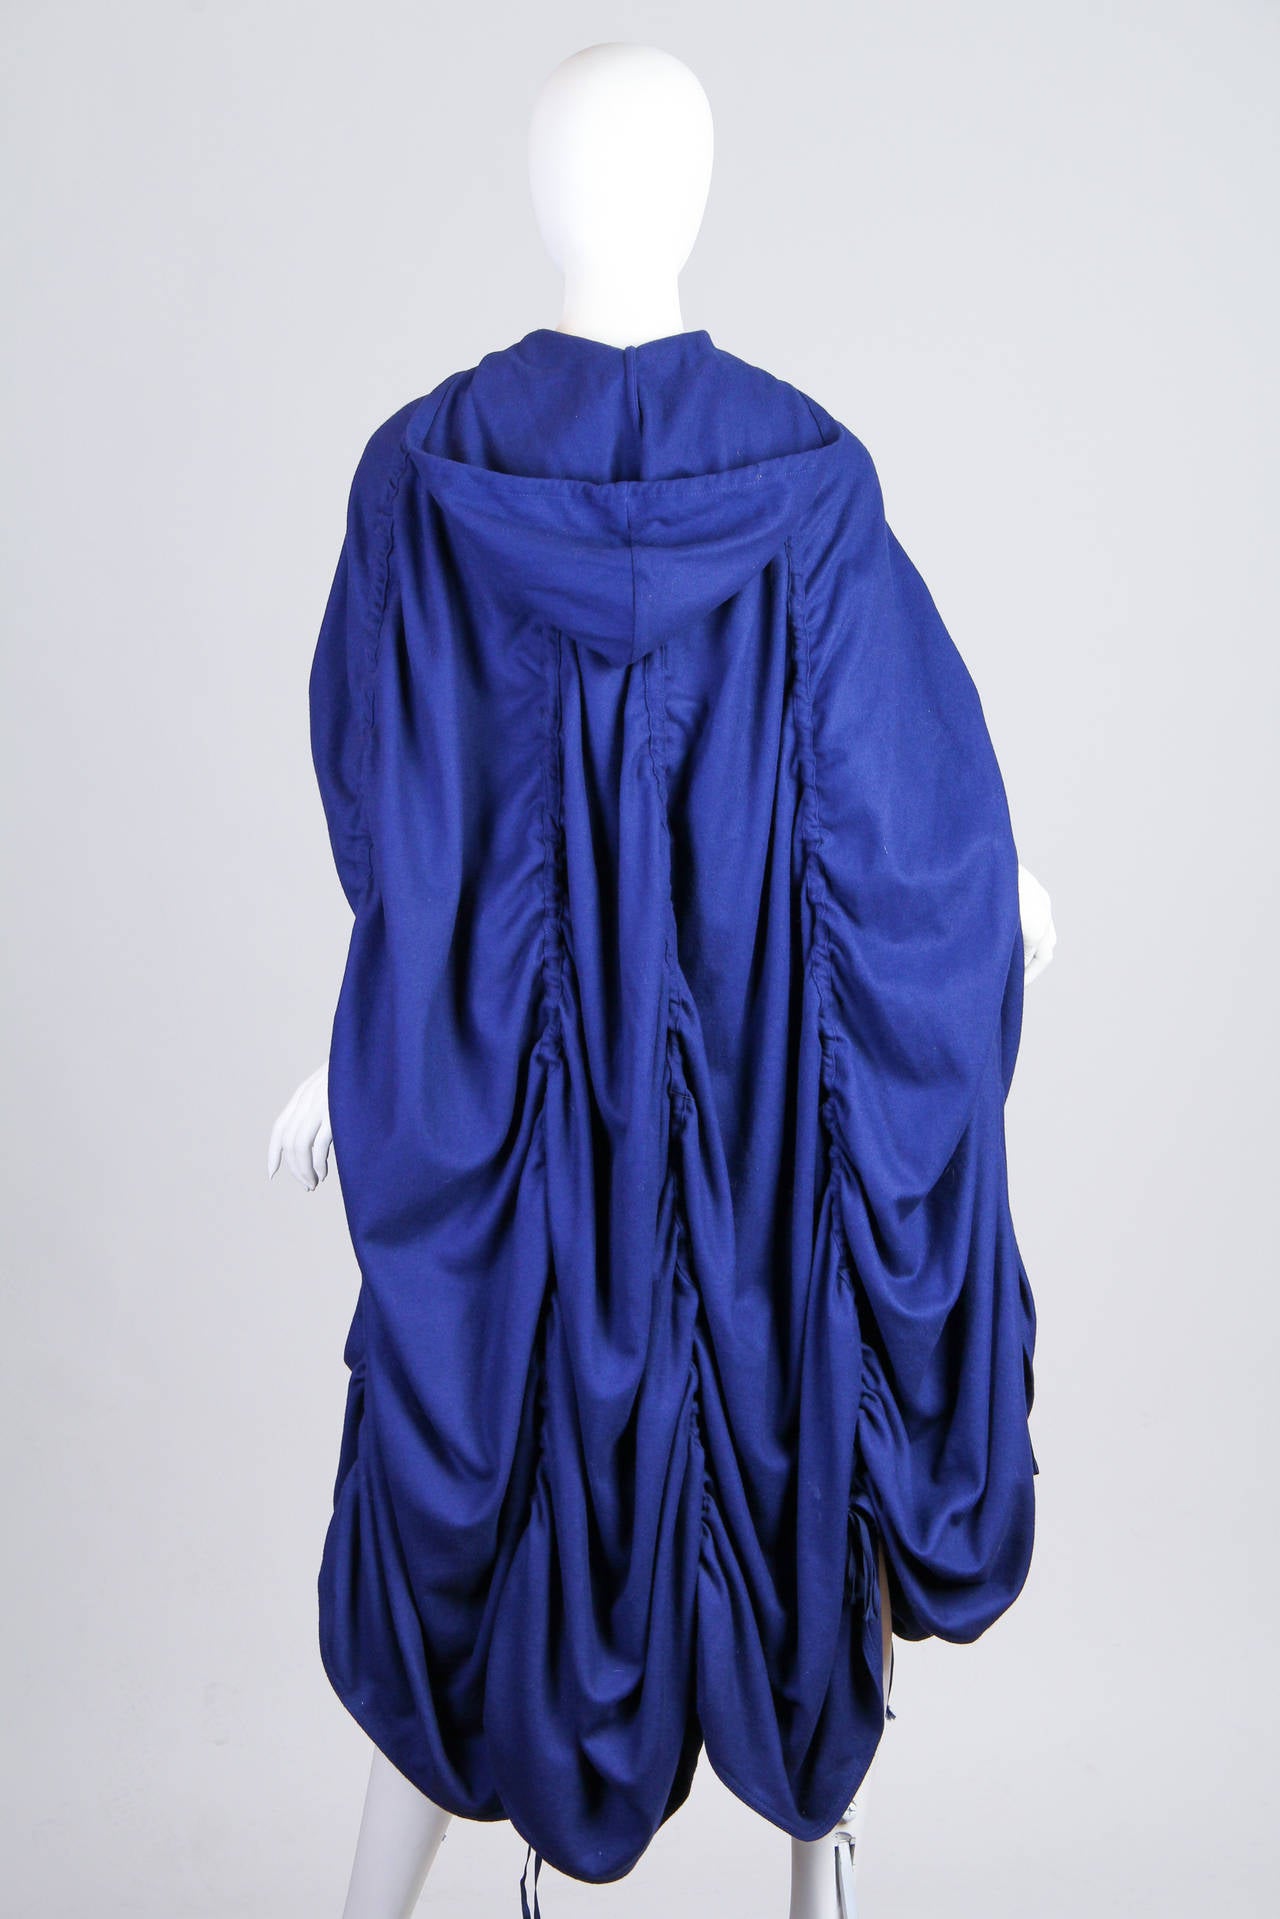 This is a sapphire-hued cape by Jean-Paul Gaultier's 